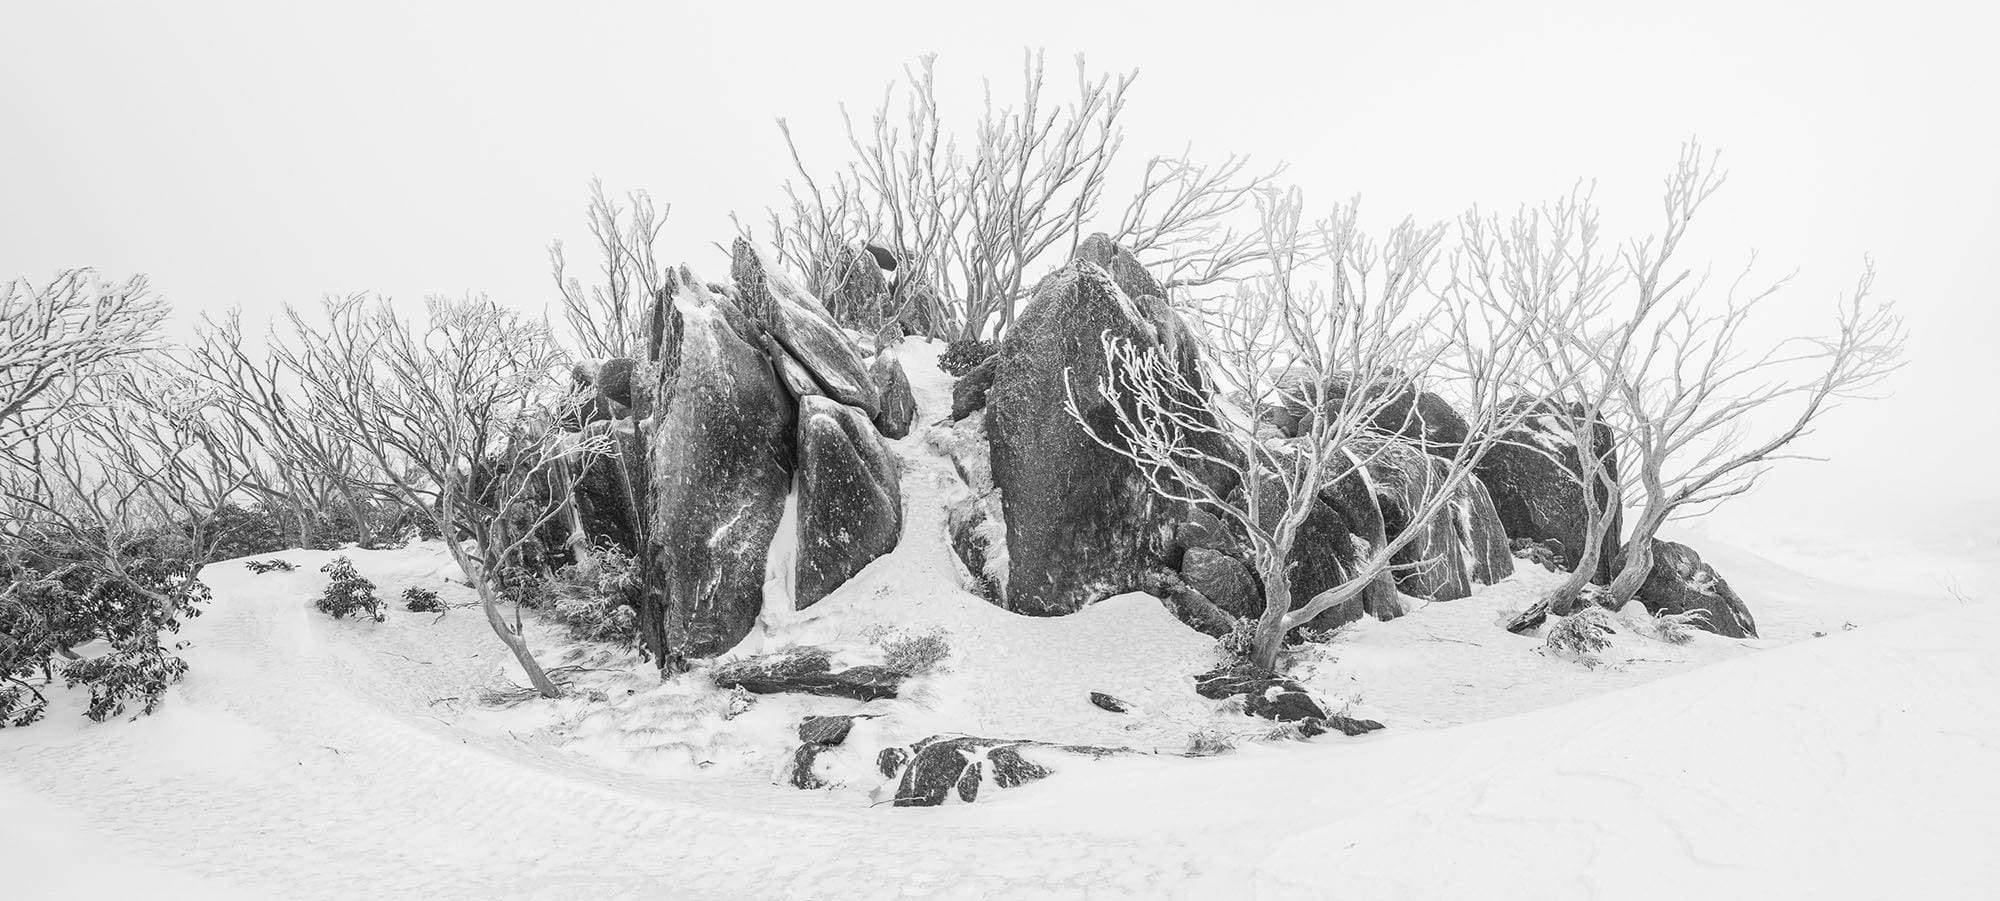 A group of stones and thin tree stems over a snow-covered land, Rocky Outcrop - Snowy Mountains NSW